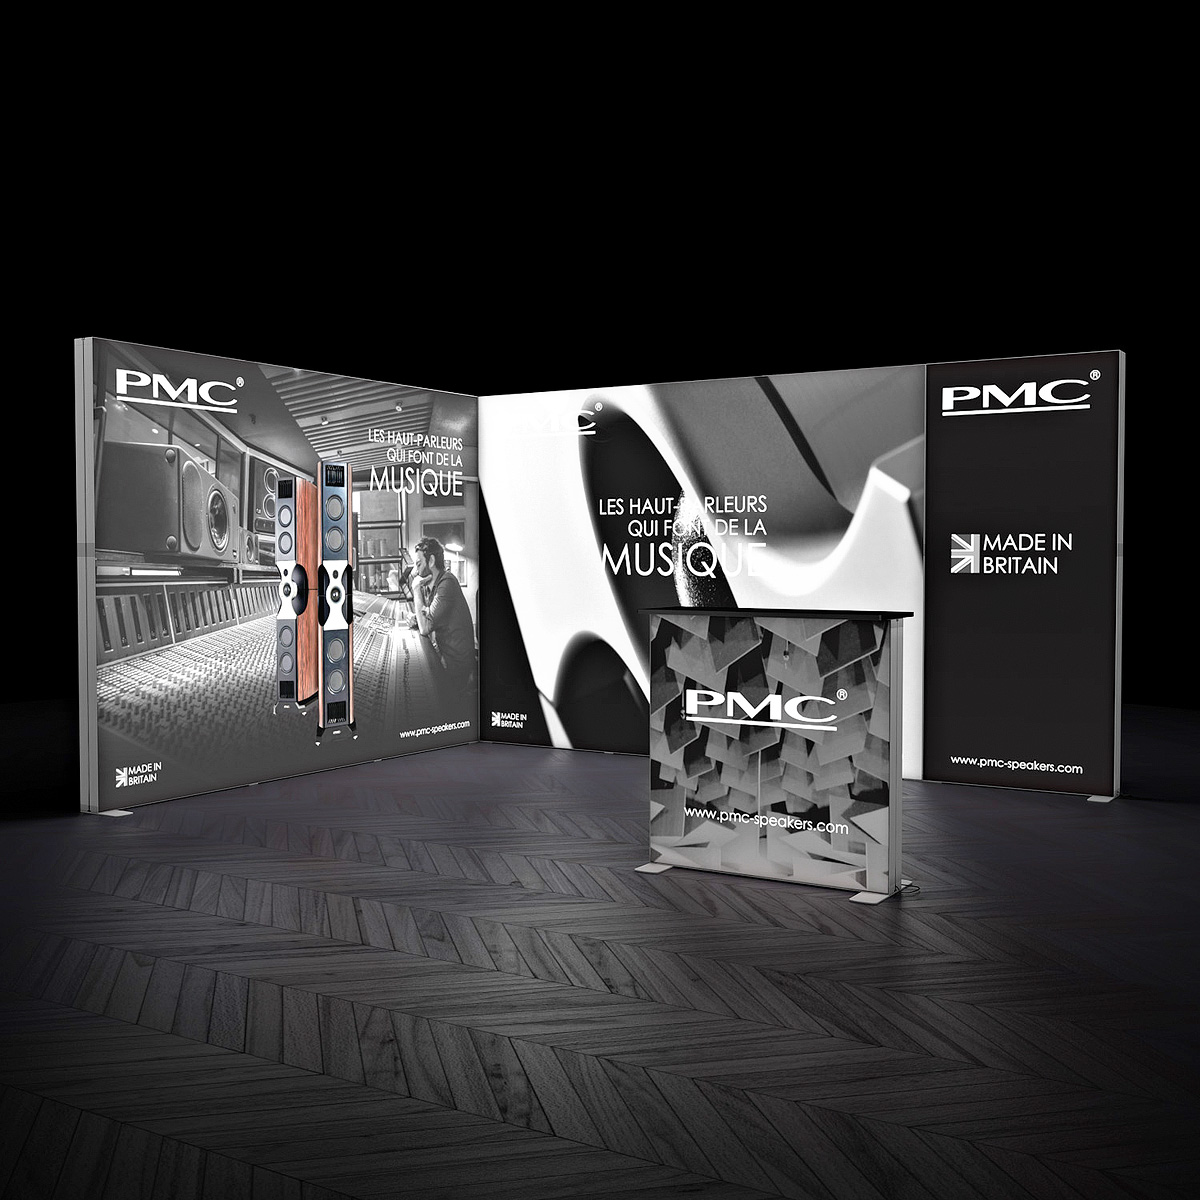 FABRILUX® LED Lightboxes